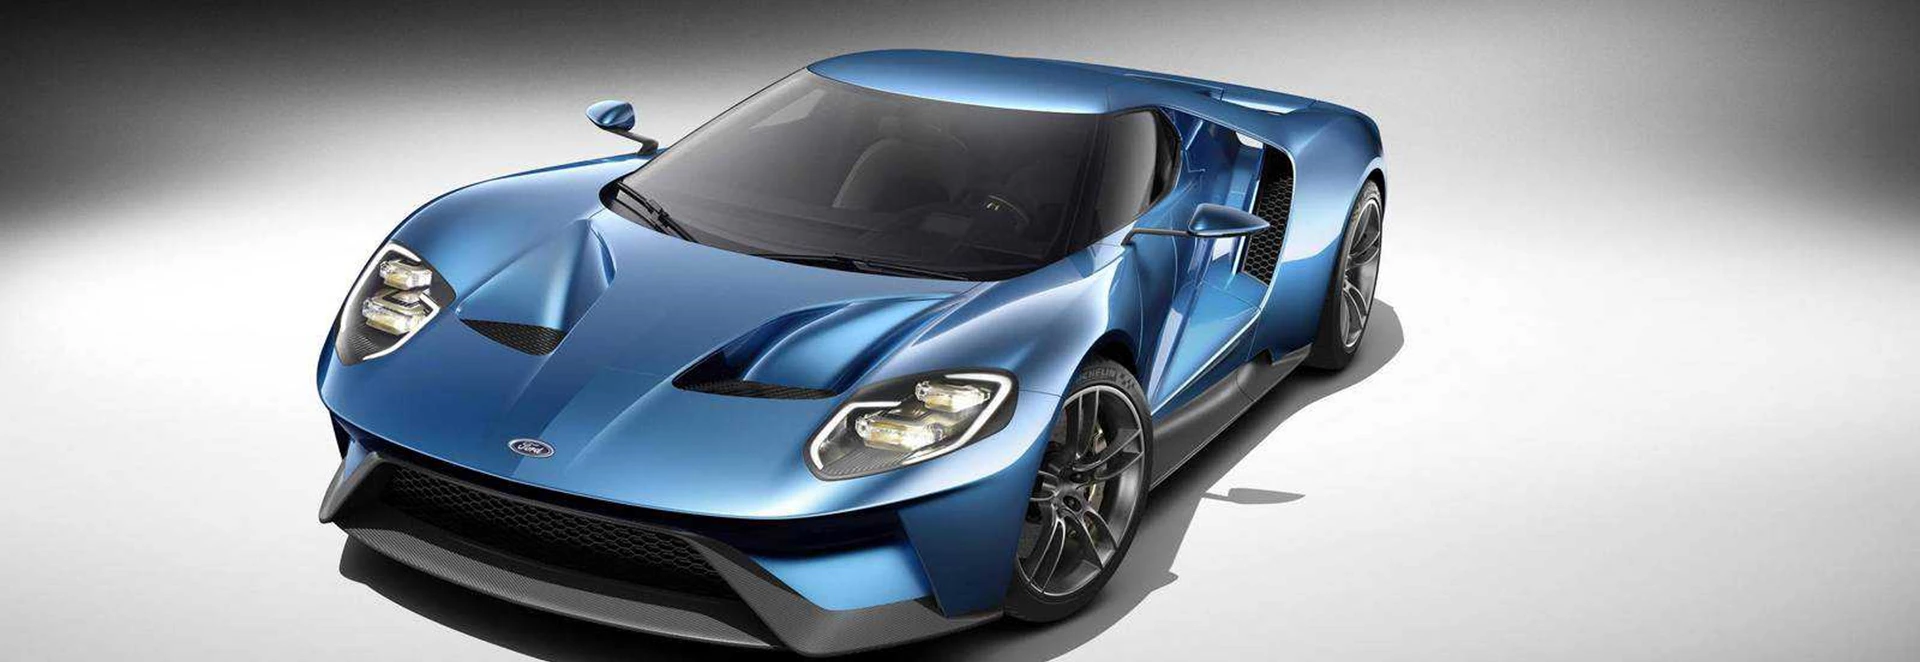 Ford engineer: Ferrari 458 is the best car in the world, but the new Ford GT’s even better